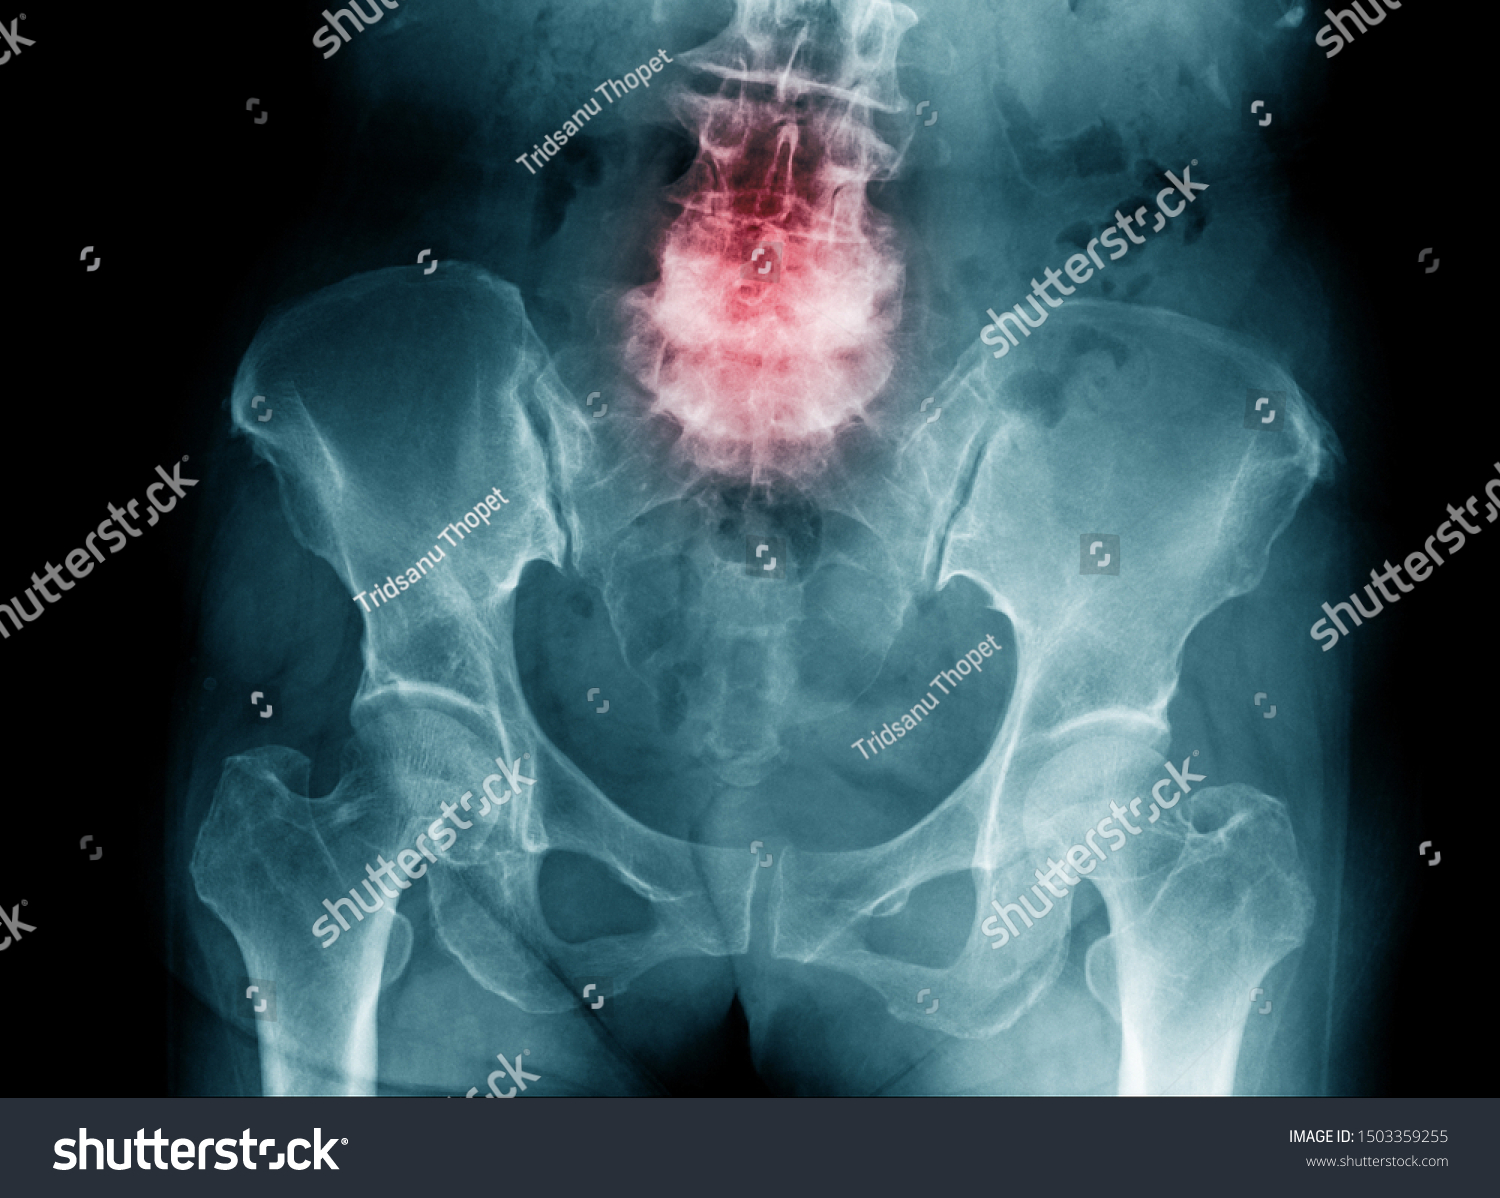 spondylosis x-ray image, x-ray image of compression fracture  L4-5 of human spine #1503359255